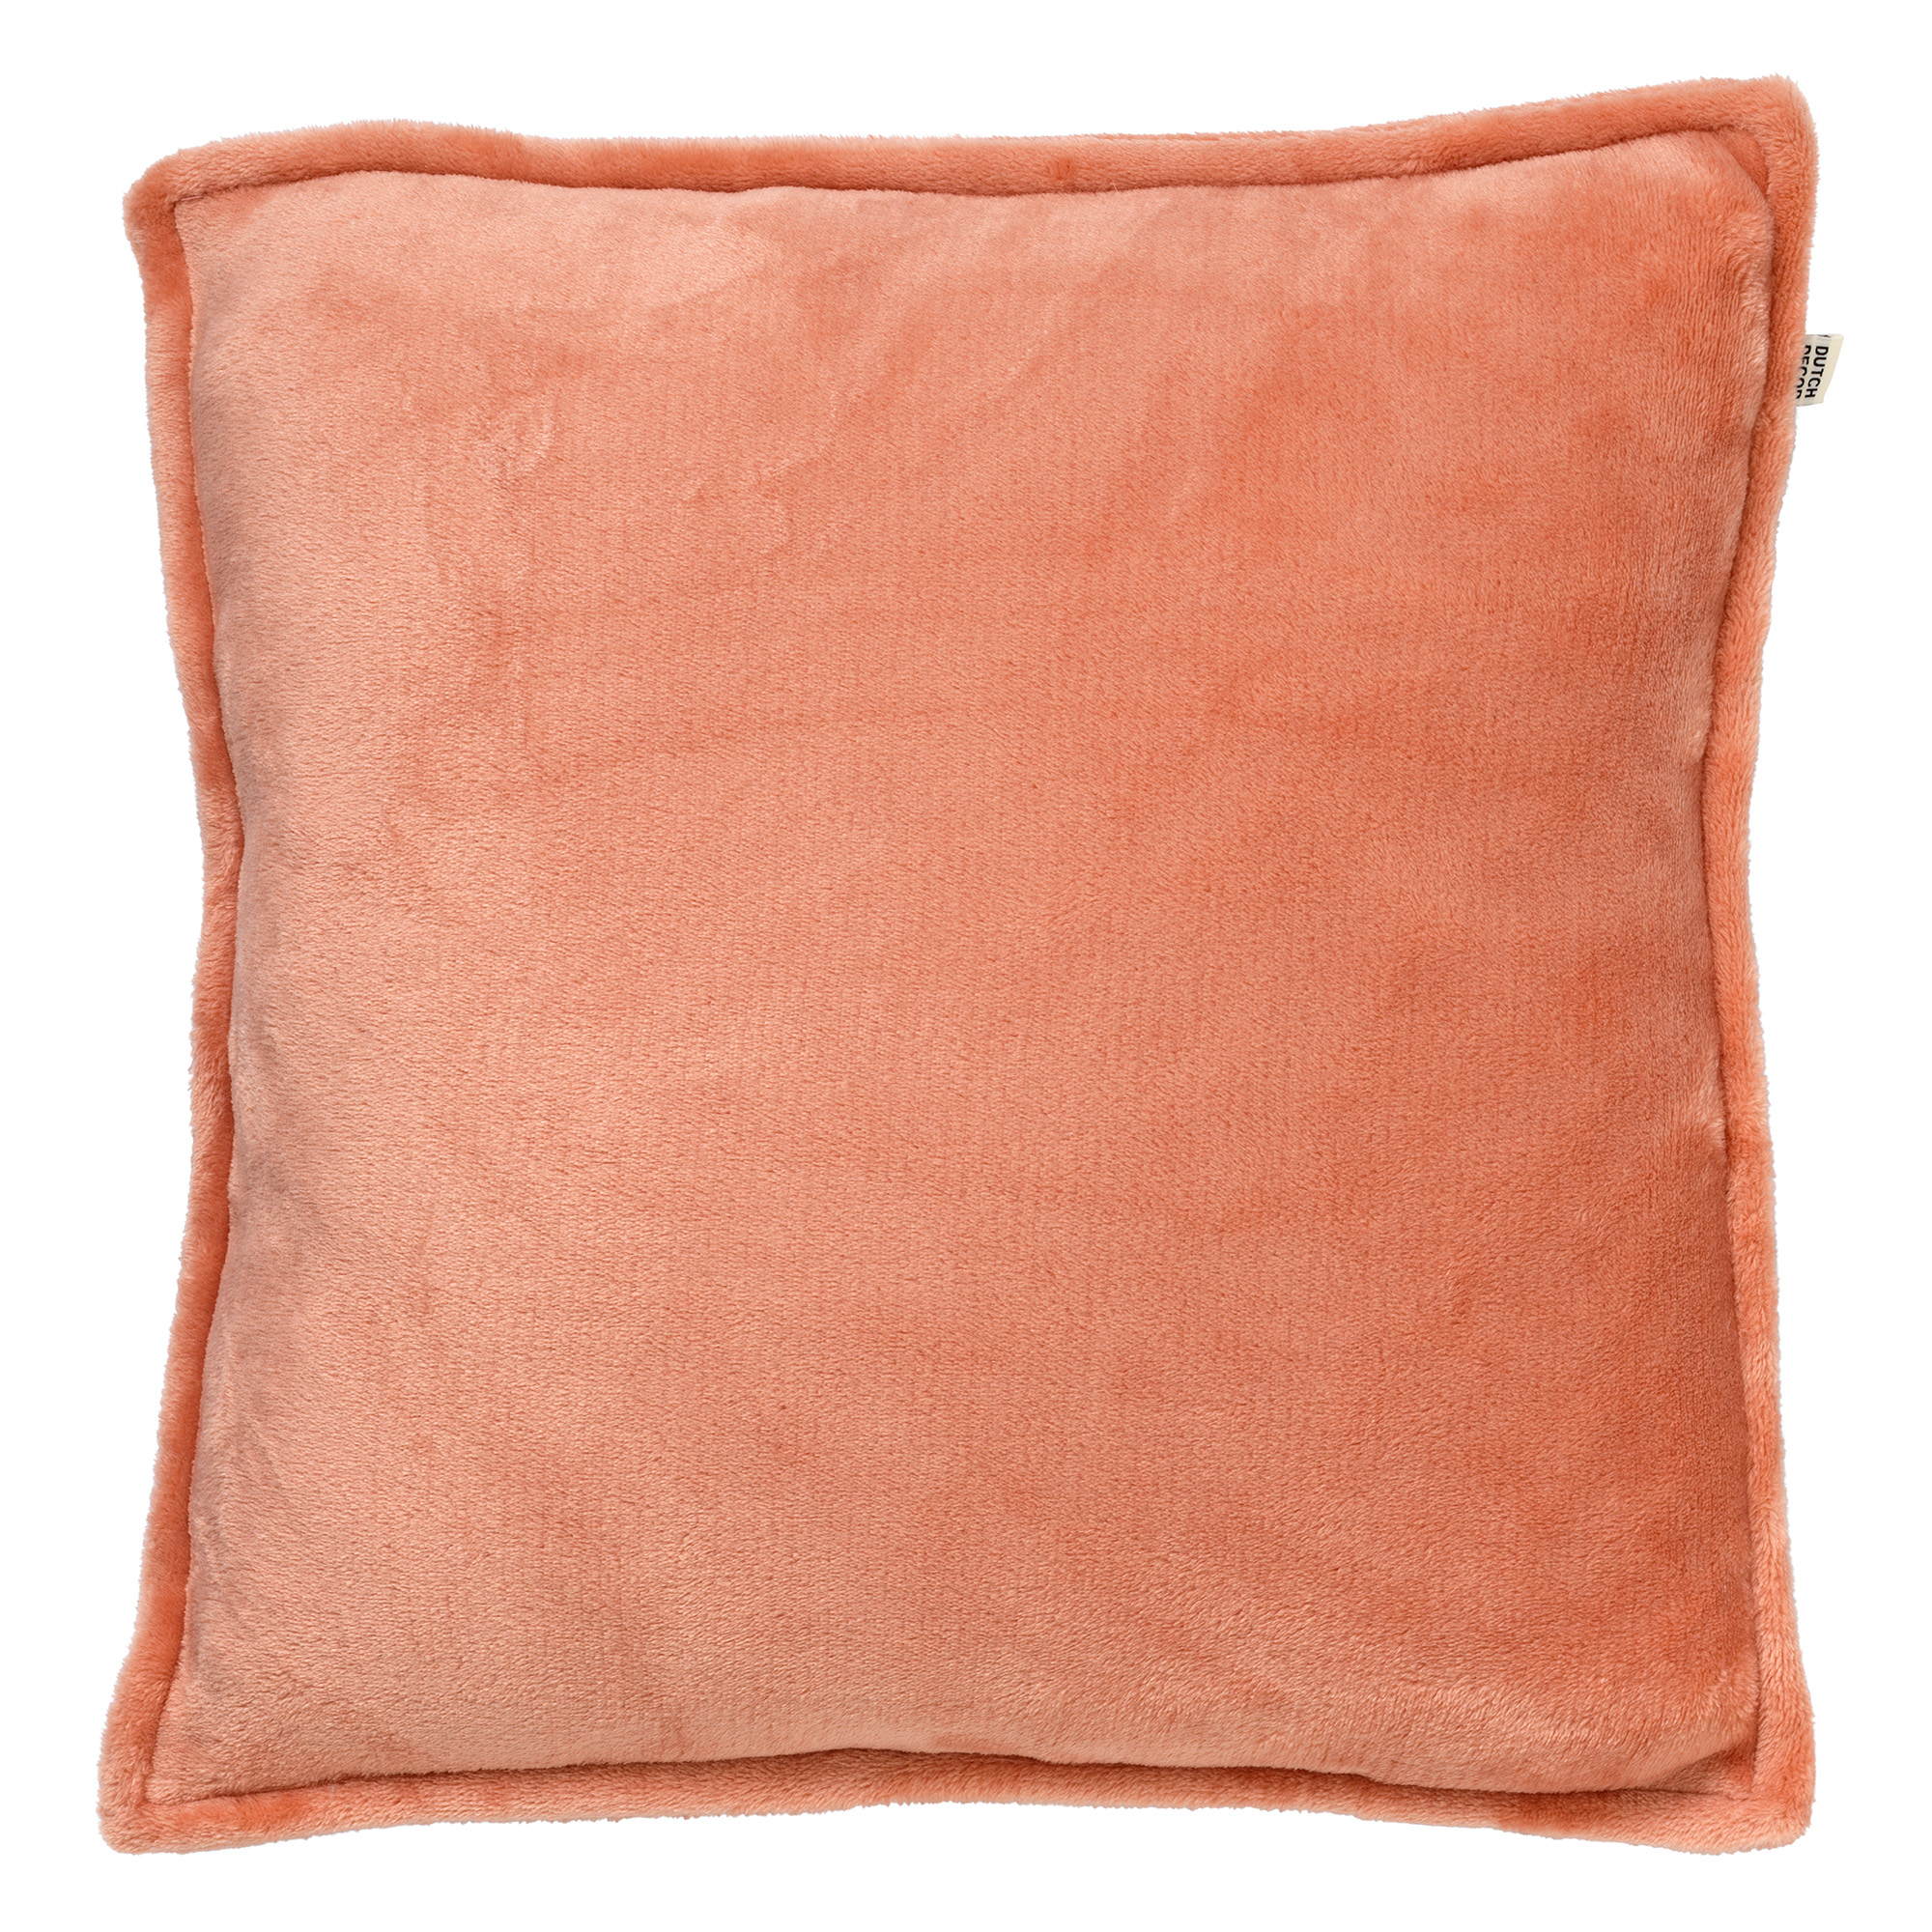 CILLY - Kussenhoes fleece 45x45 cm - Muted Clay - roze